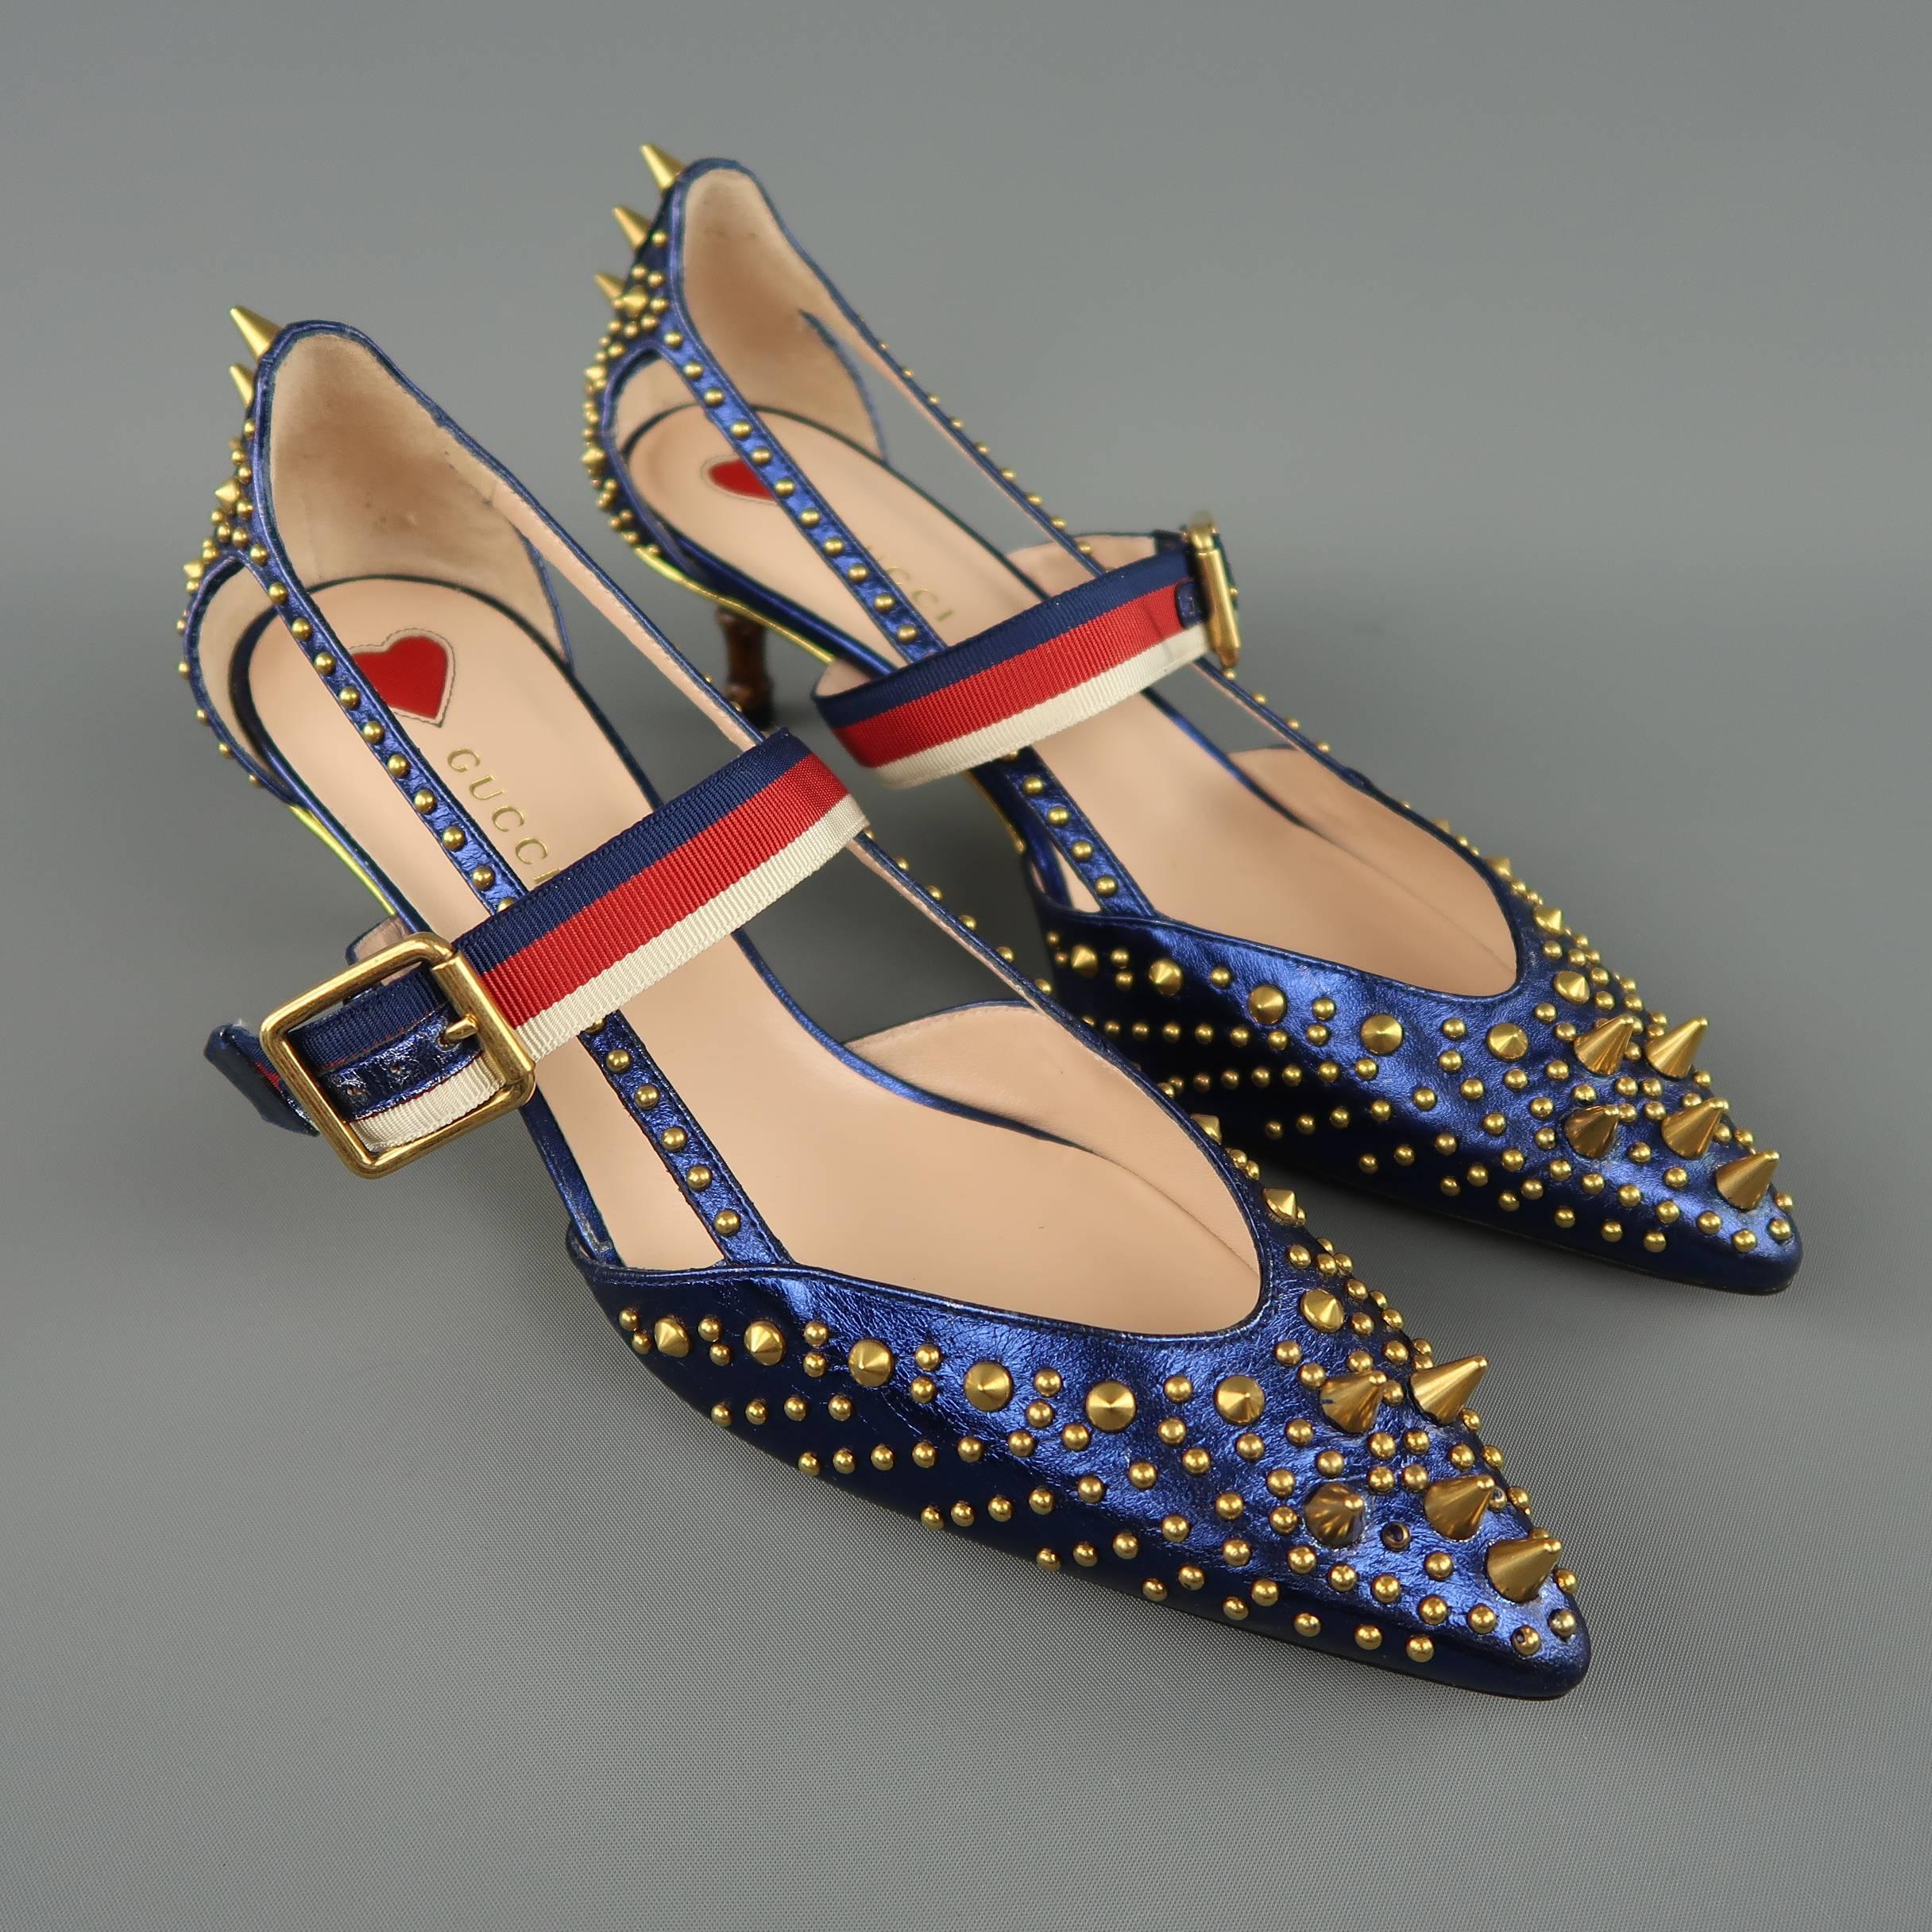 Gucci UNIA pumps come in metallic navy blue leather with gold tone studs and spikes, signature red, white, and blue striped strap, and faux bamboo kitten heel. Never worn. Made in Italy.
 
Brand New. Retails $1190
Marked: IT 38.5 
 
Heel: 2 in.
